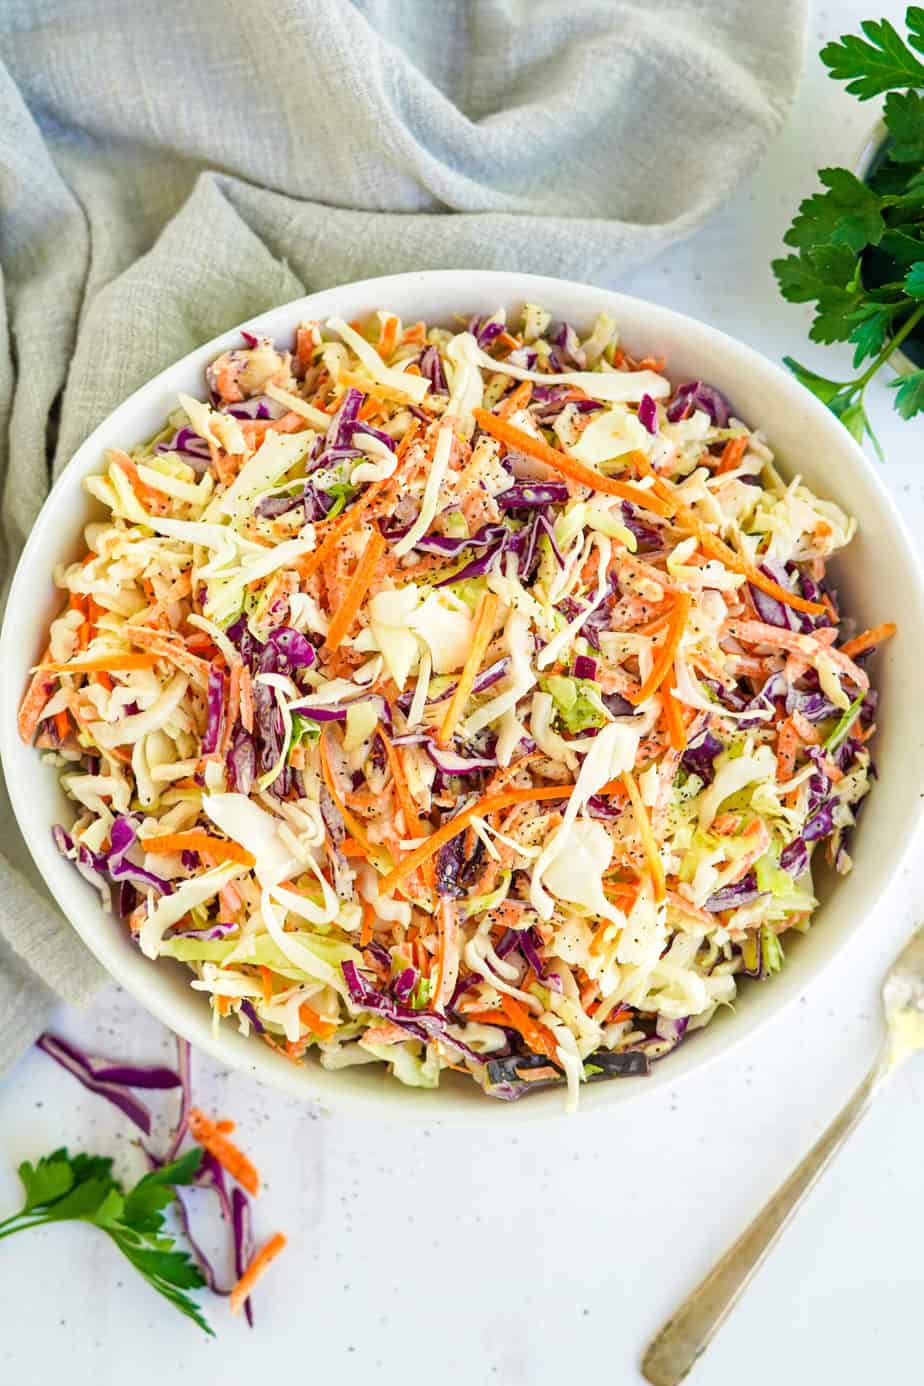 Coleslaw in a serving bowl from overhead